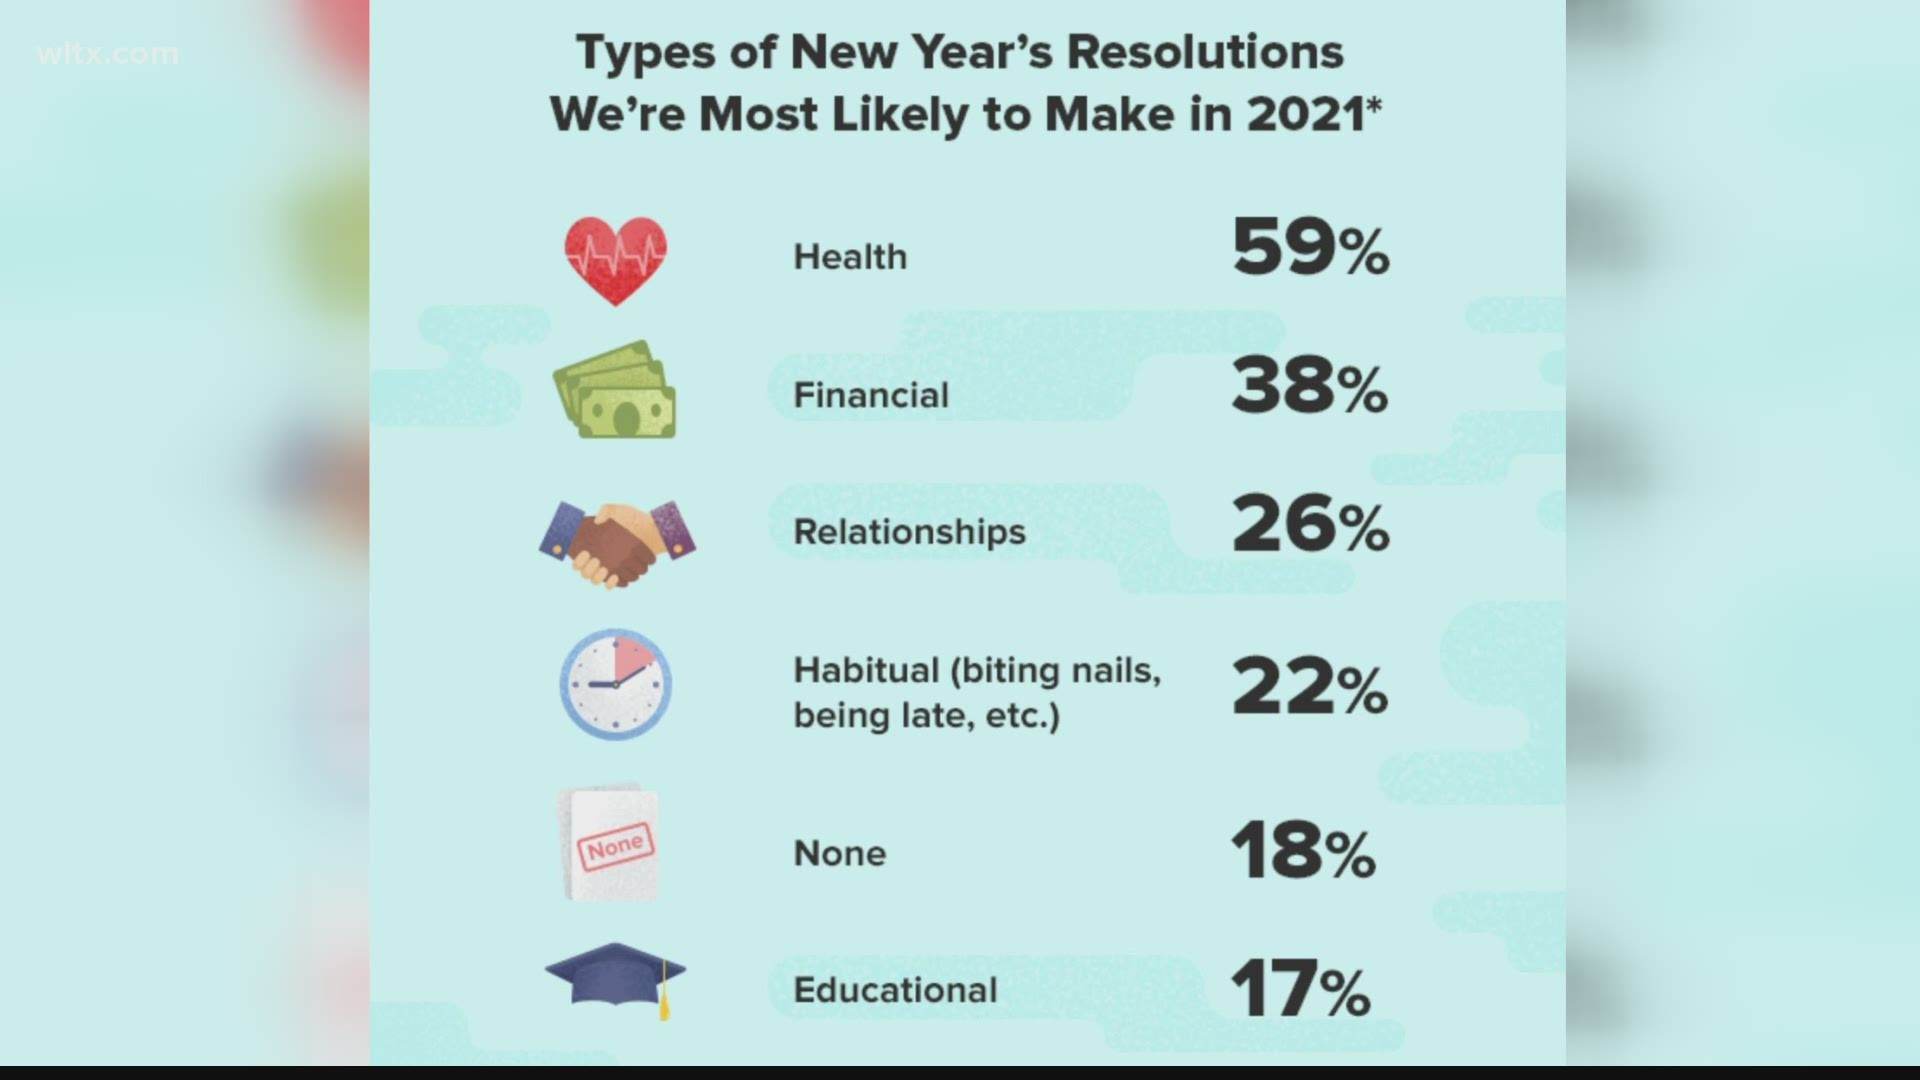 Nearly 60% of Americans say their New Year's Resolutions will be influenced by the coronavirus. Here's what you told us.